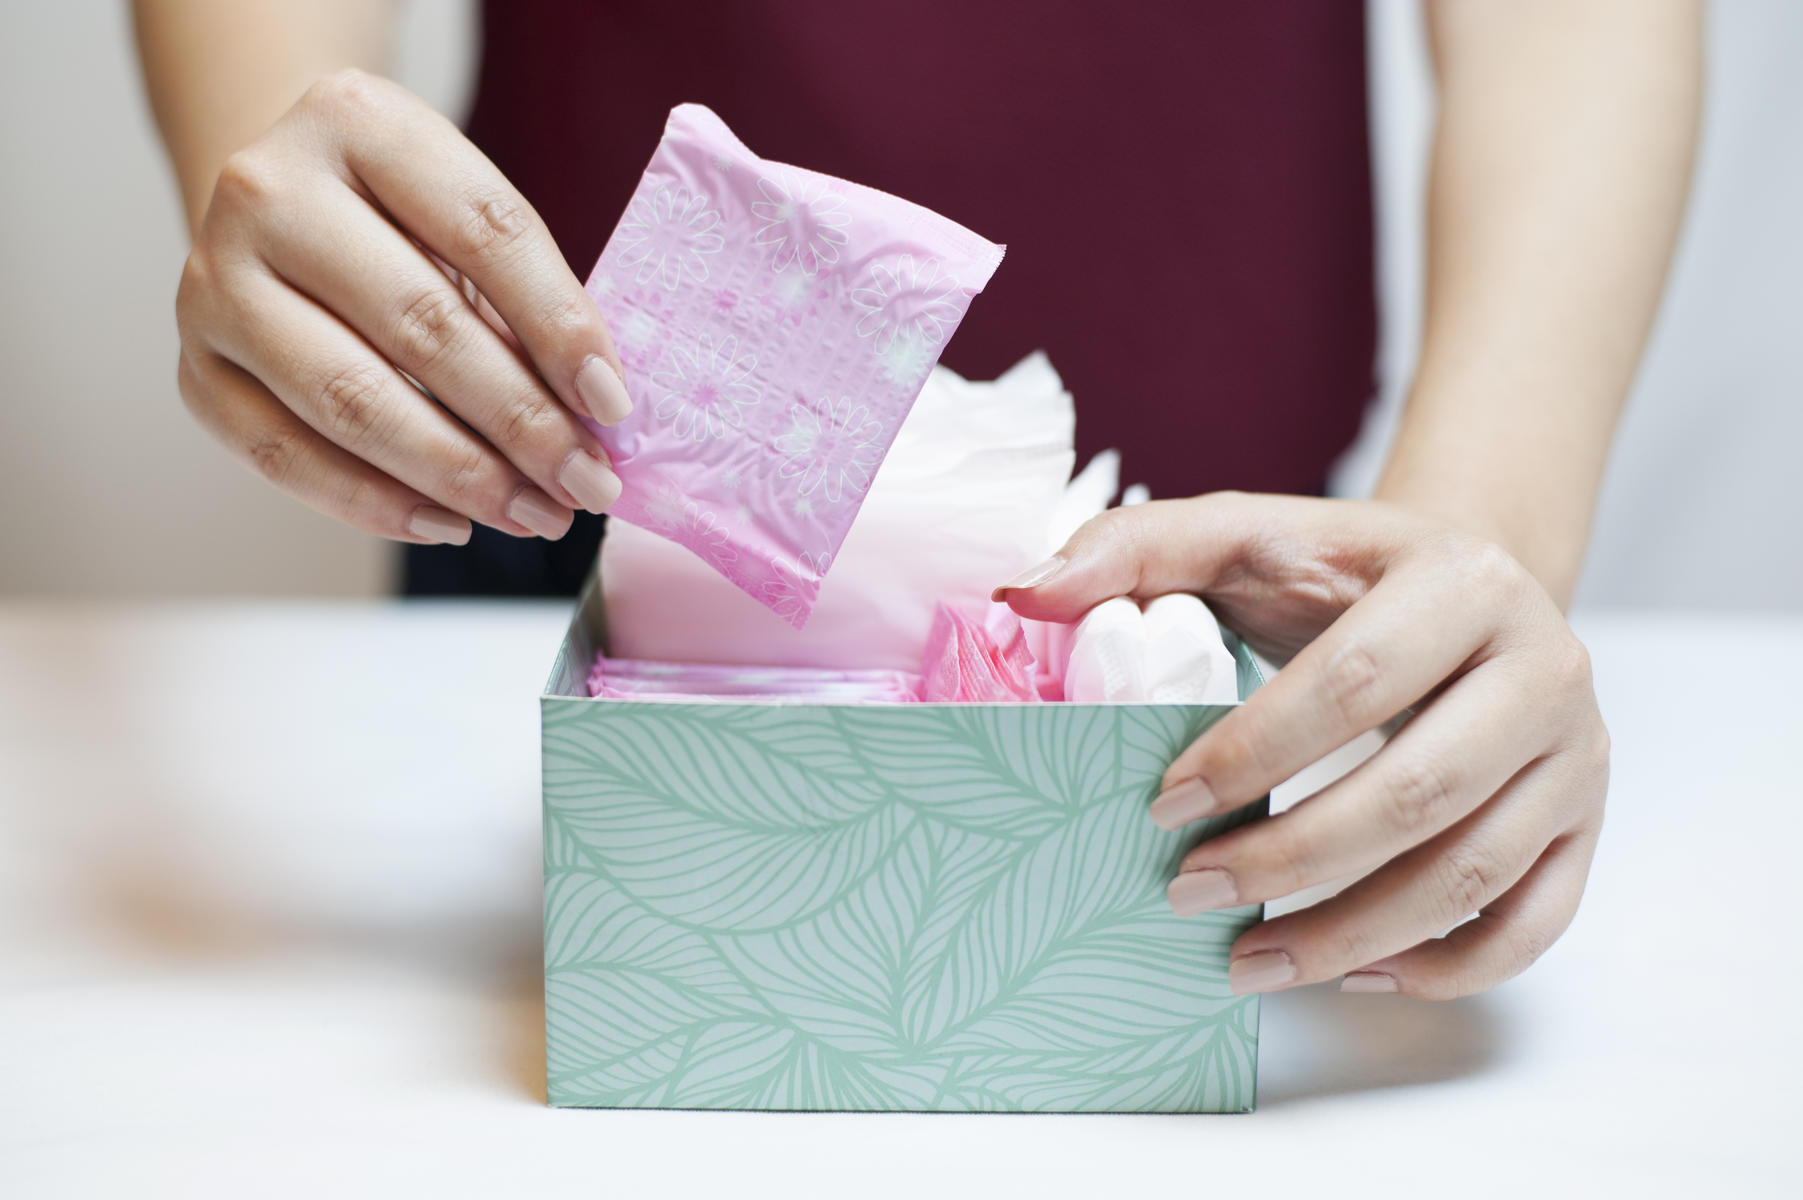 Woman Holding Pad From Box Of Feminine Supplies